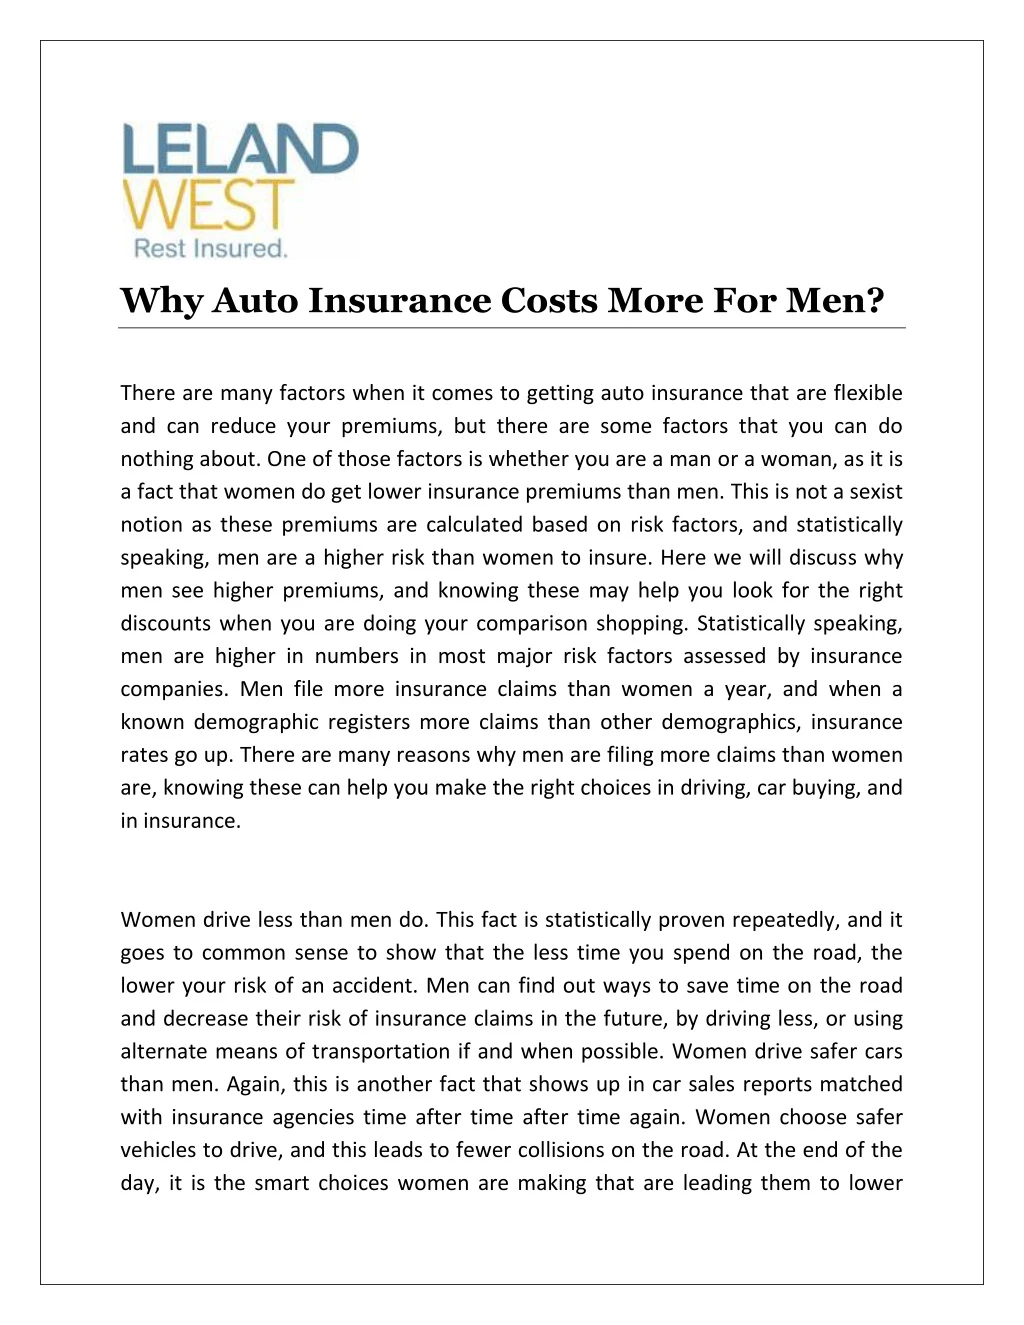 why auto insurance costs more for men